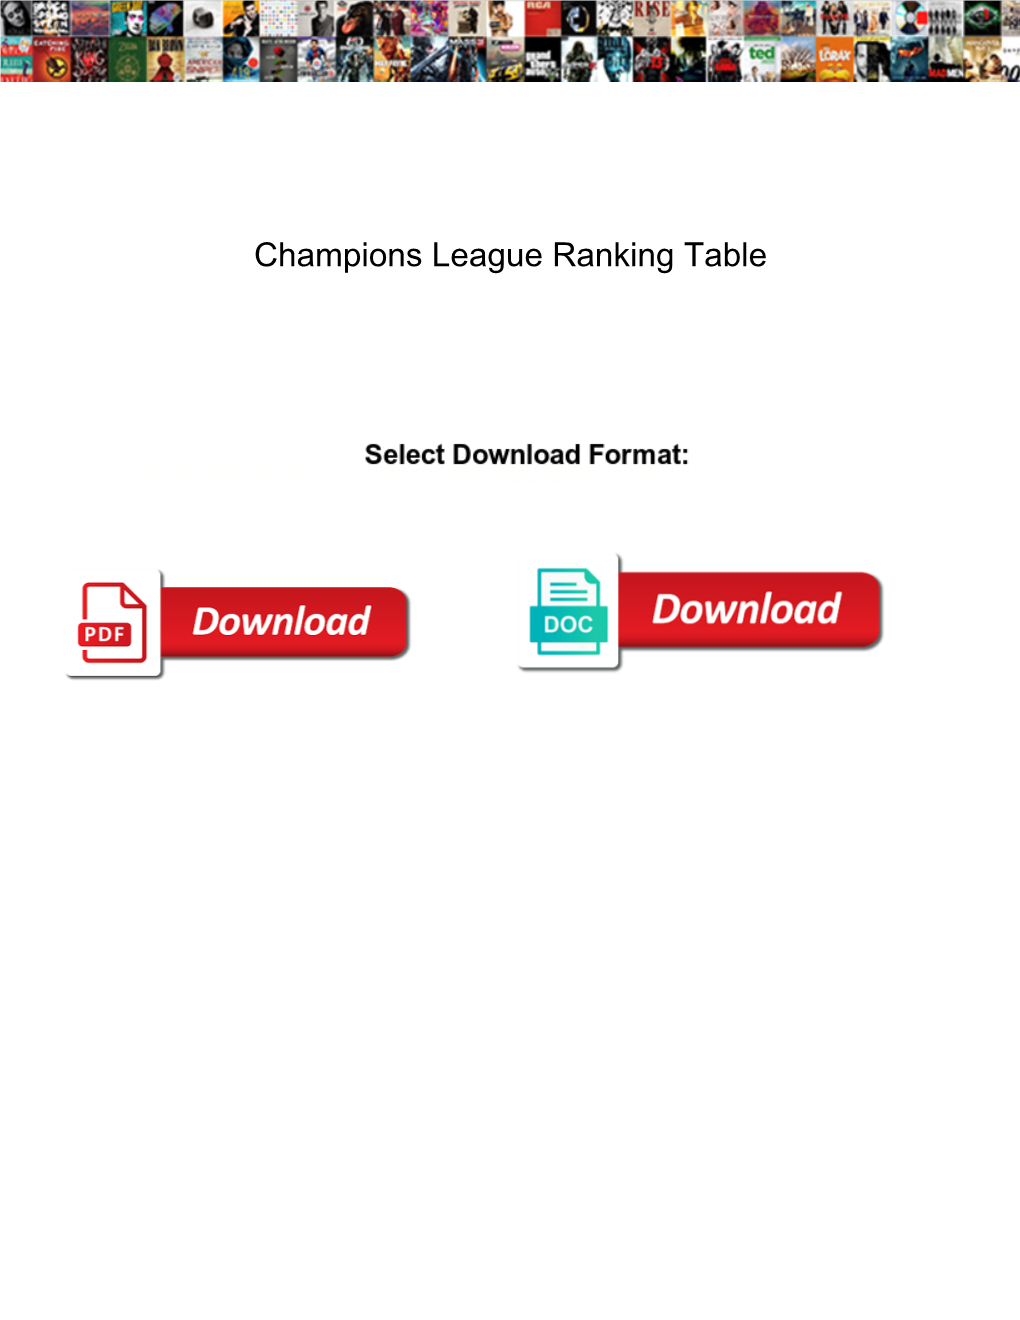 Champions League Ranking Table